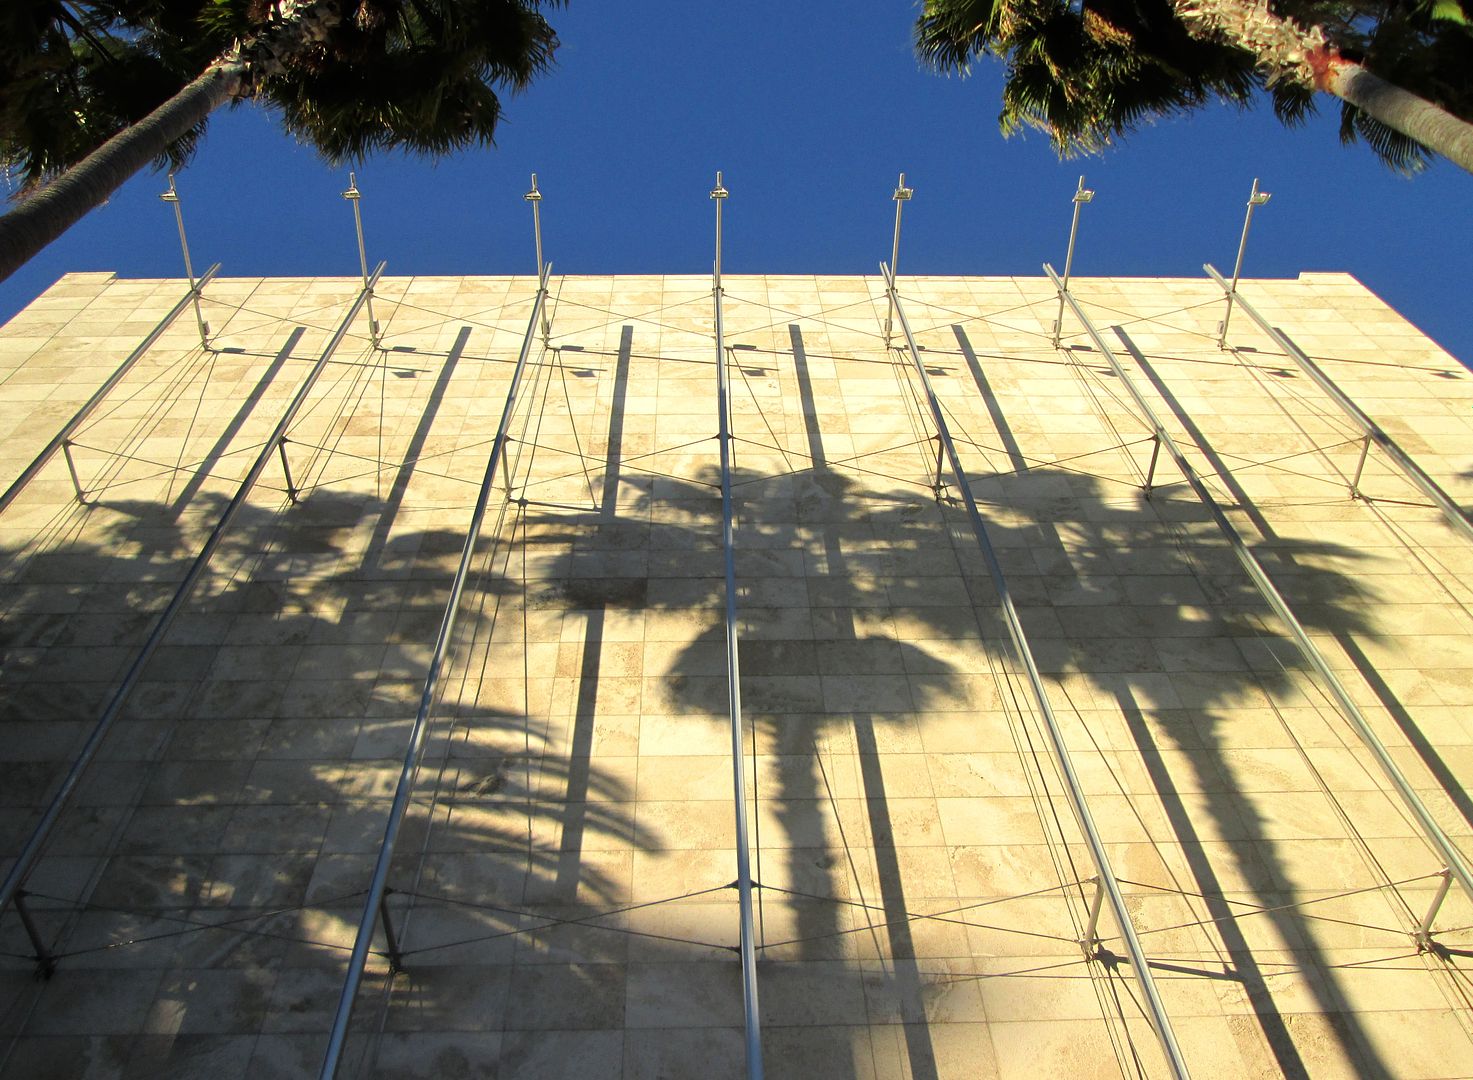 LACMA with Palms